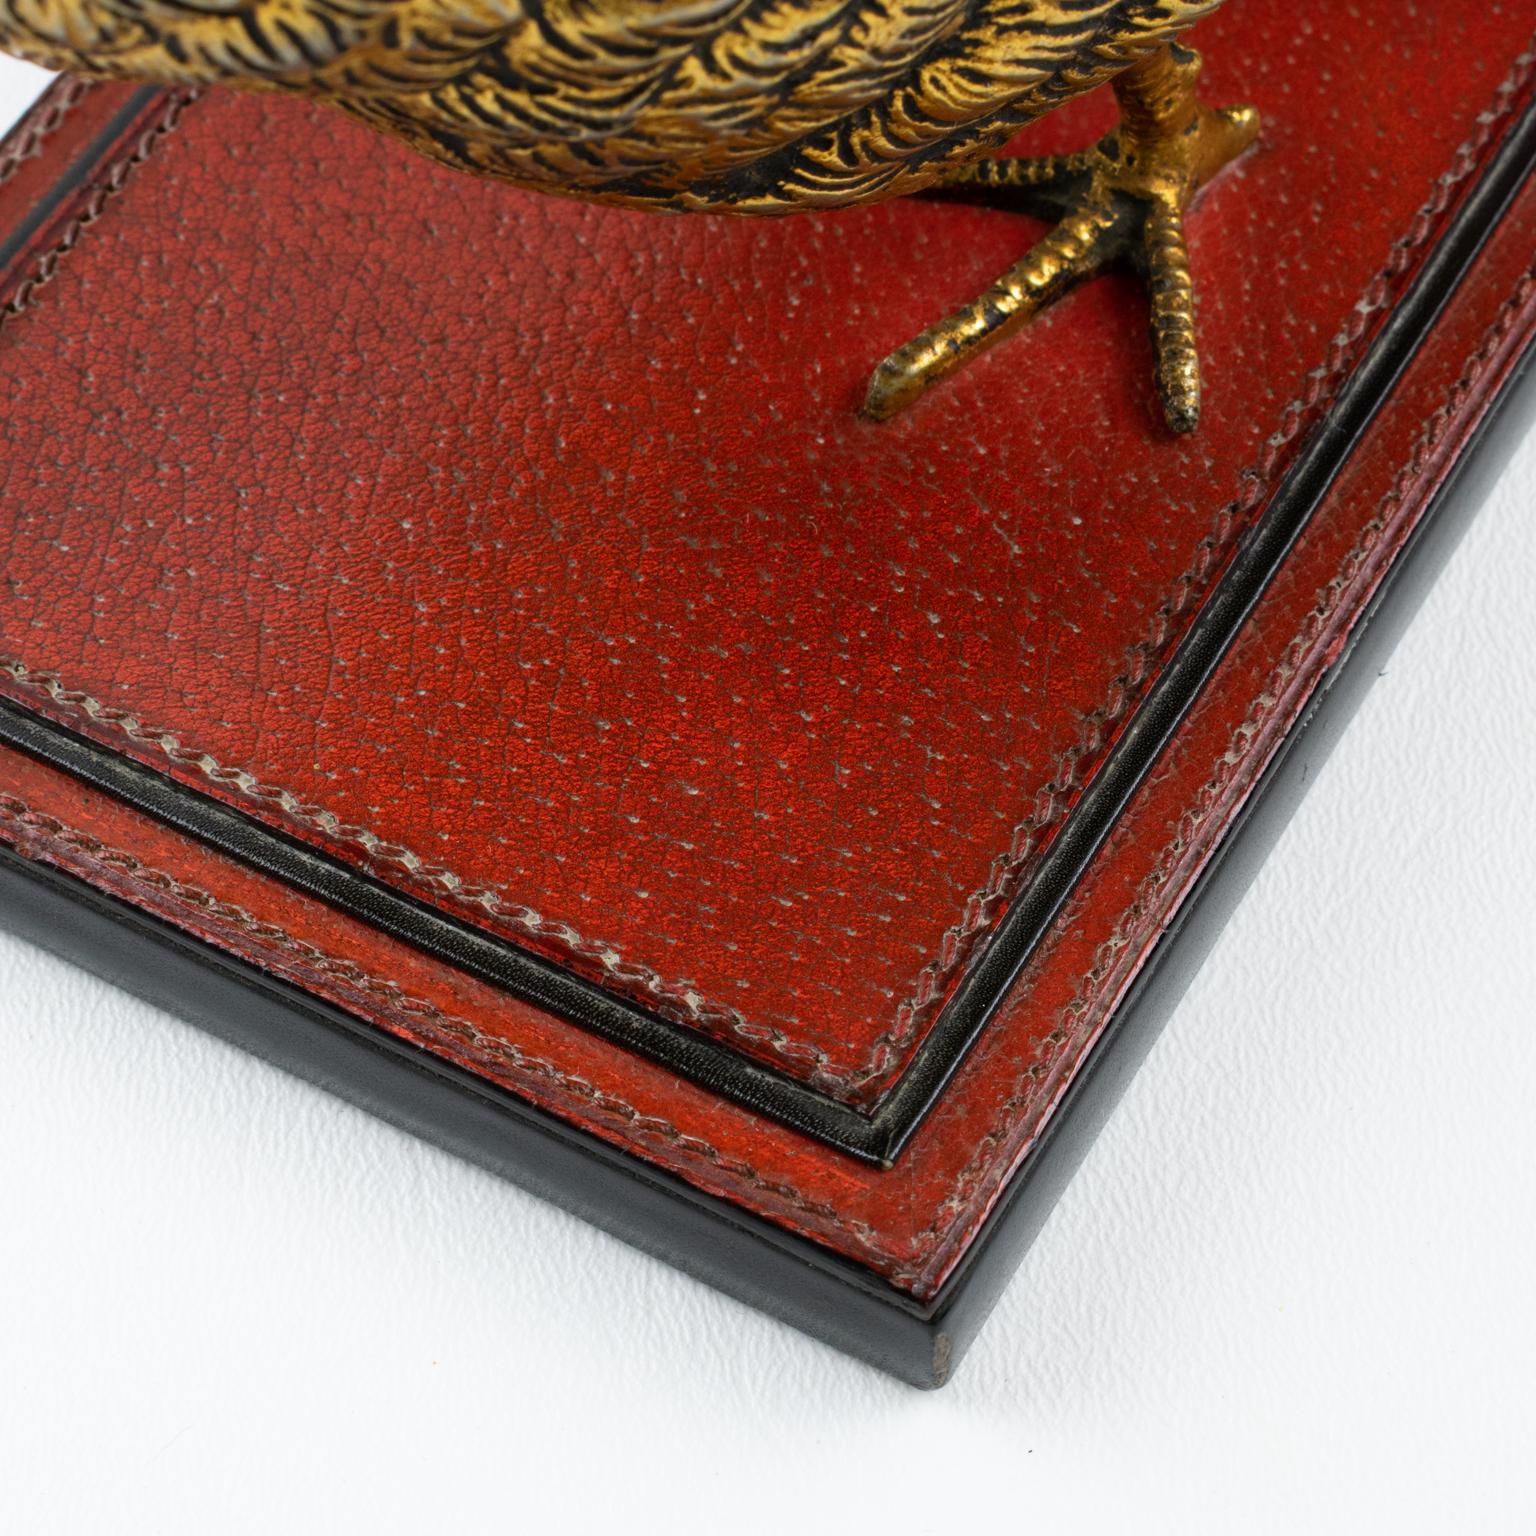 Gucci Italy Hand-Stitched Red Leather Bookends with Gilt Metal Partridges, 1970s 9